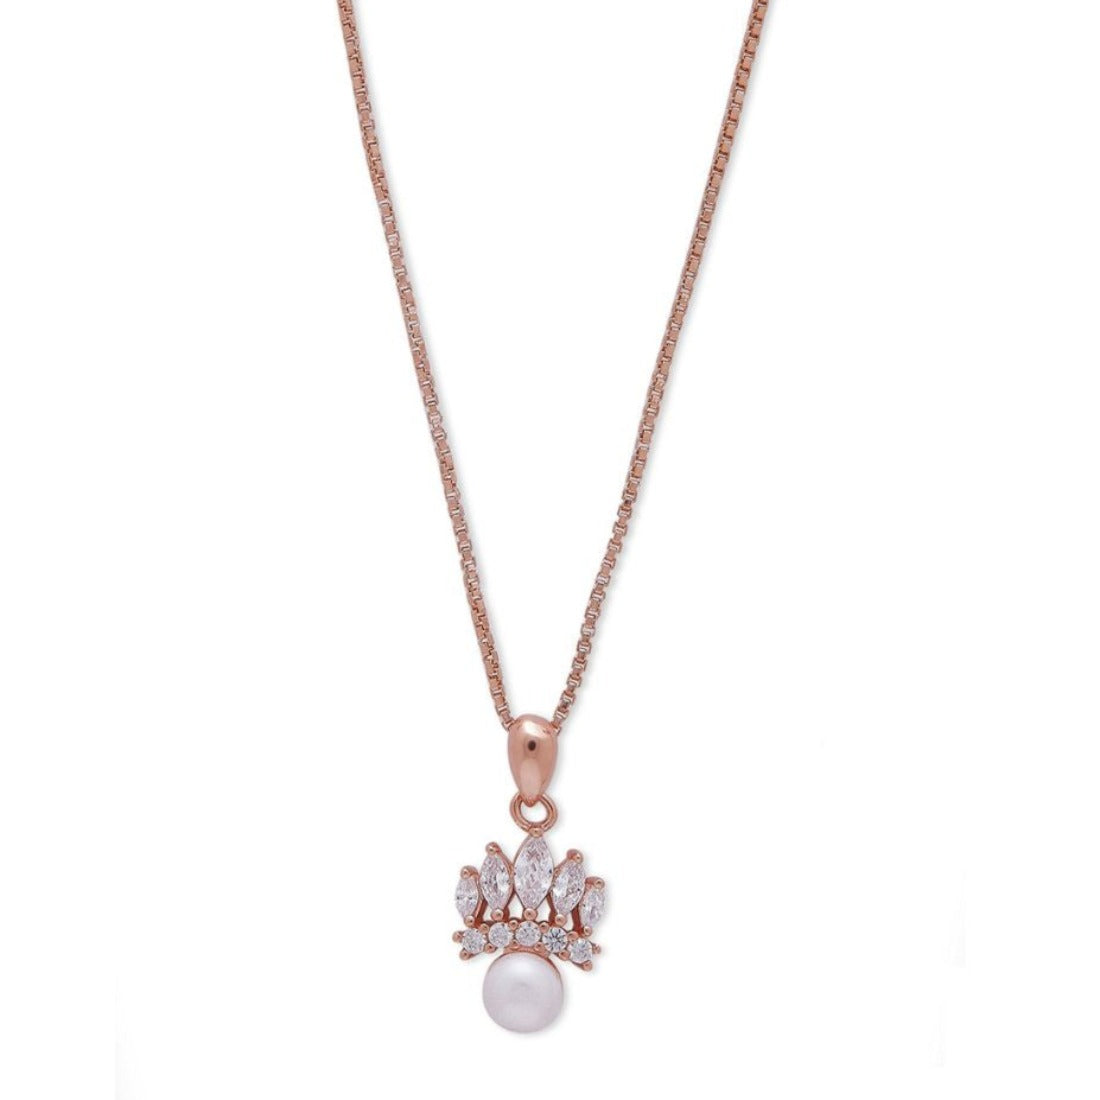 Regal Crown Jewel 925 Sterling Silver Rose Gold-Plated Pendant with Chain